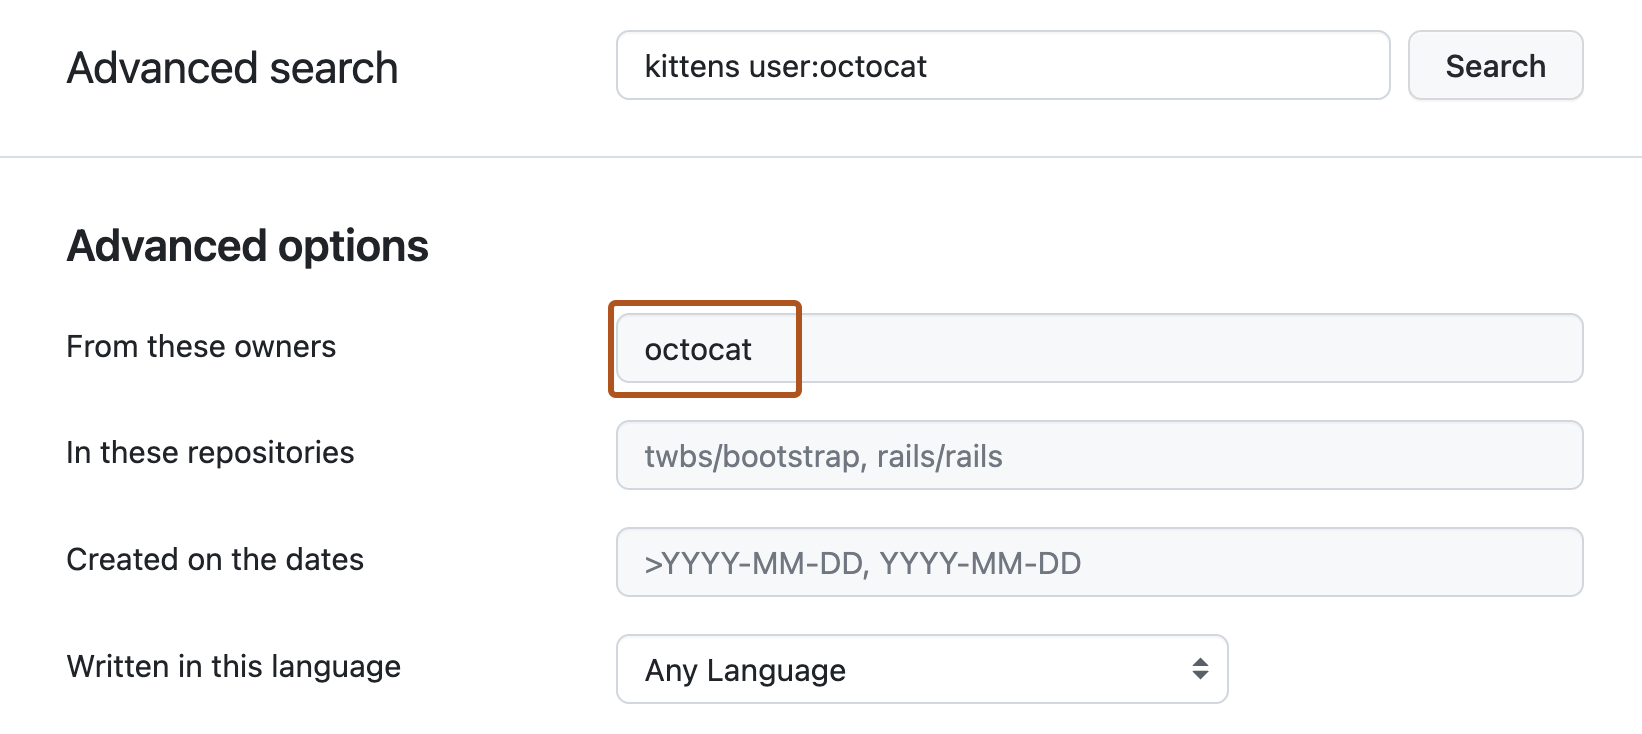 Advanced Search page. Top search bar holds "kittens user:octocat" query. Under "Advanced options", "From these owners" text box holds term "octocat".